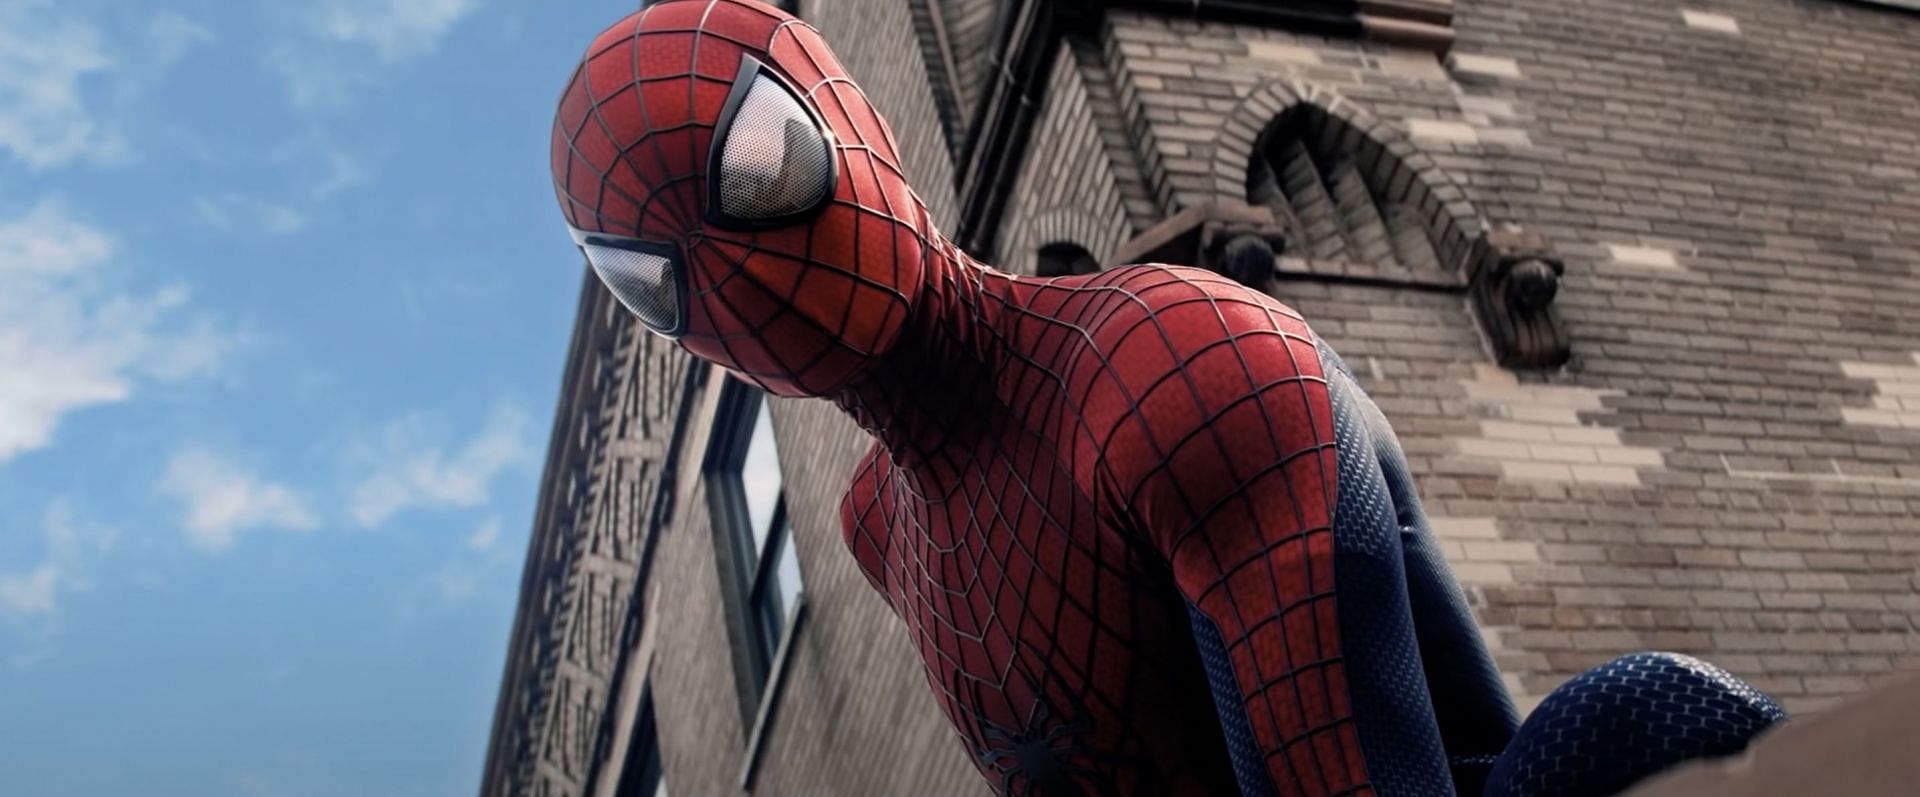 Garfield&#039;s Spider-Man as he appeared in &#039;The Amazing Spider-Man 2&#039; (Image via Sony)